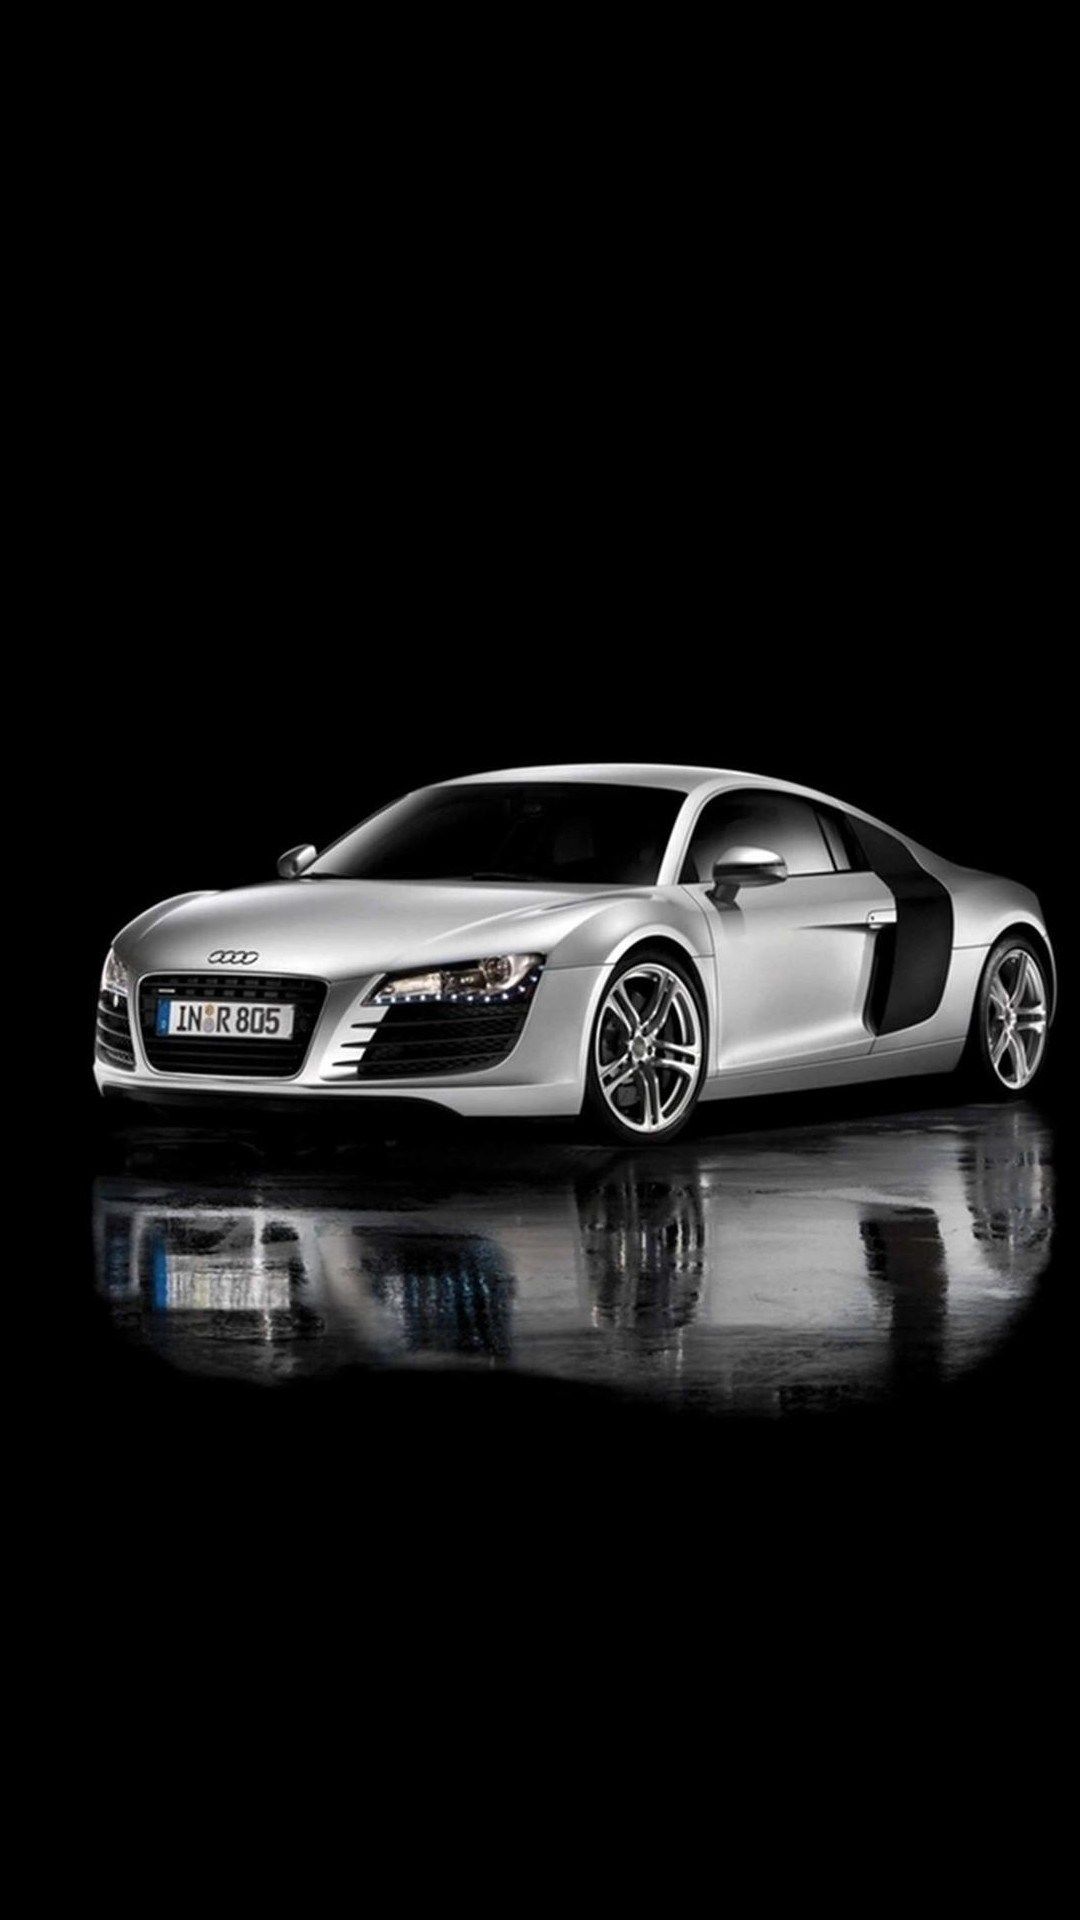 Wallpaper Audi R8 Android Apps On Google Play